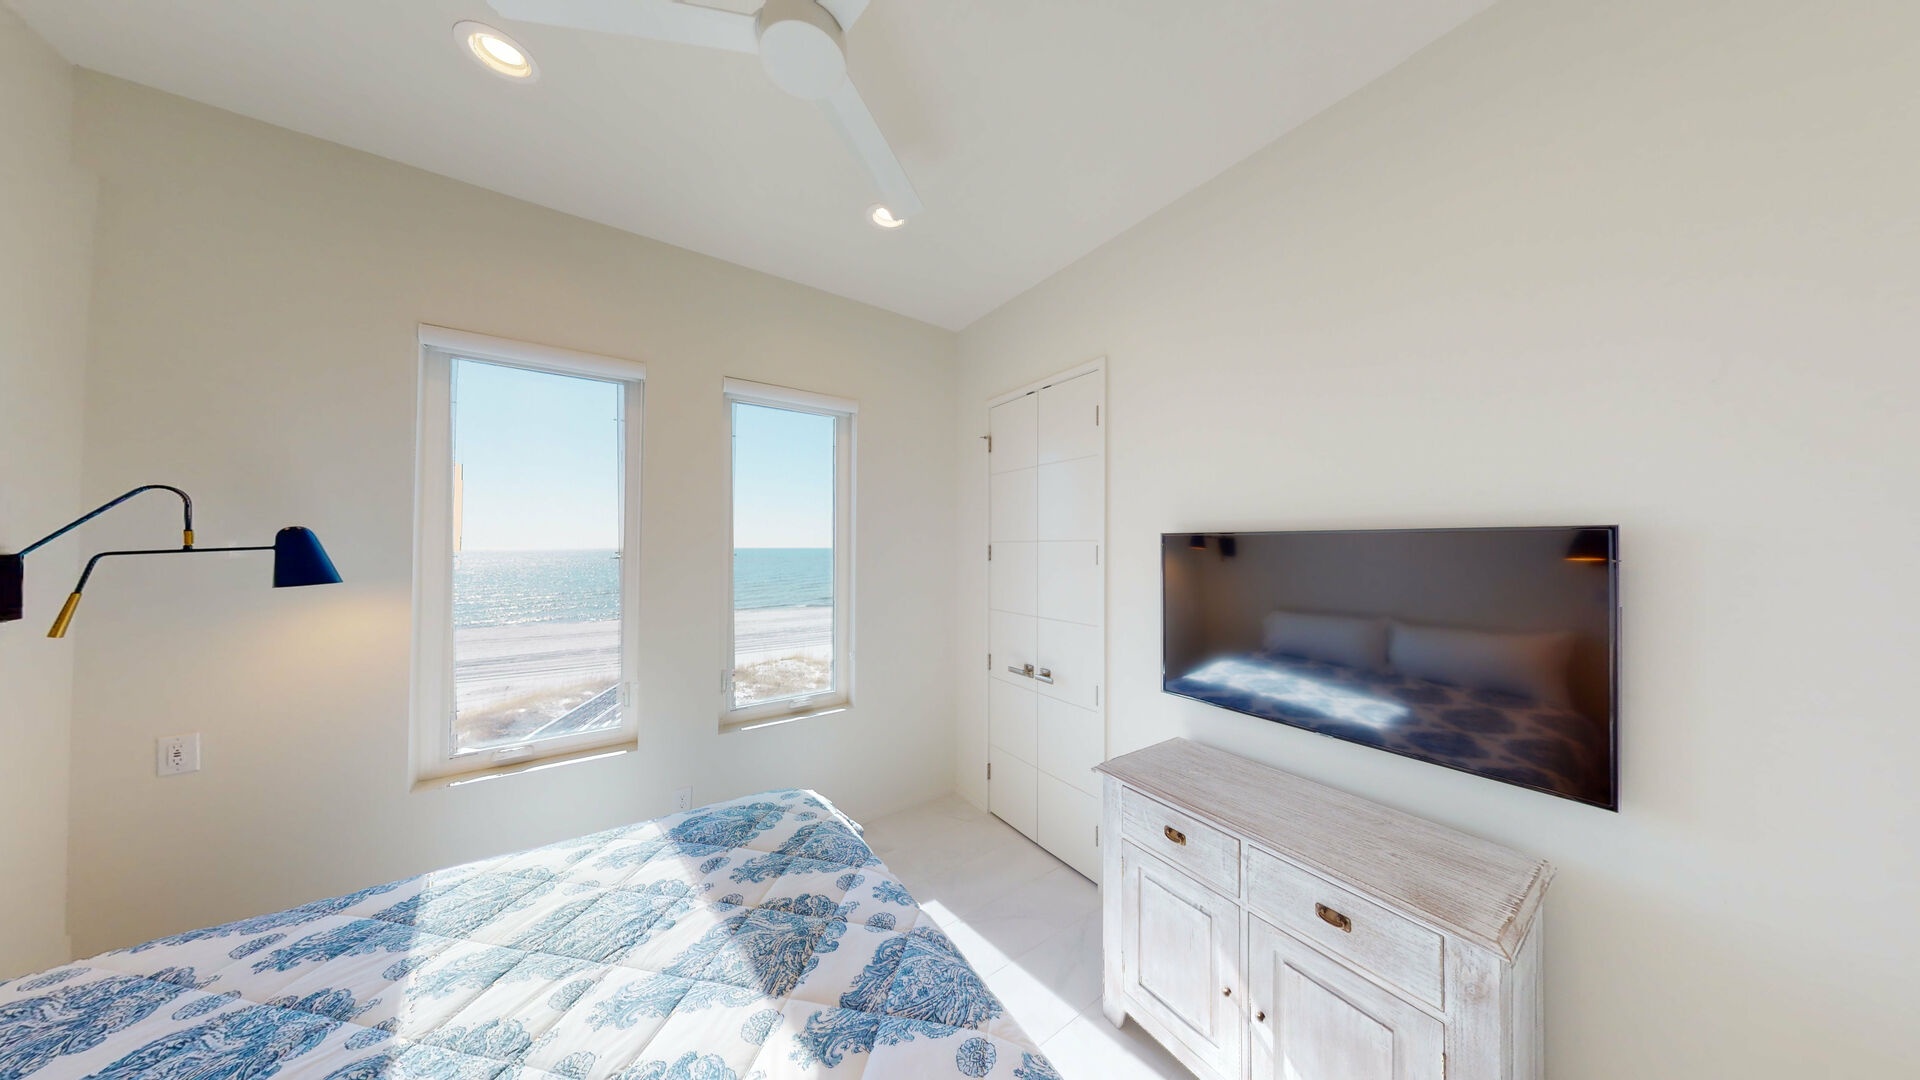 Bedroom 2 has a TV, Gulf views and a private bathroom